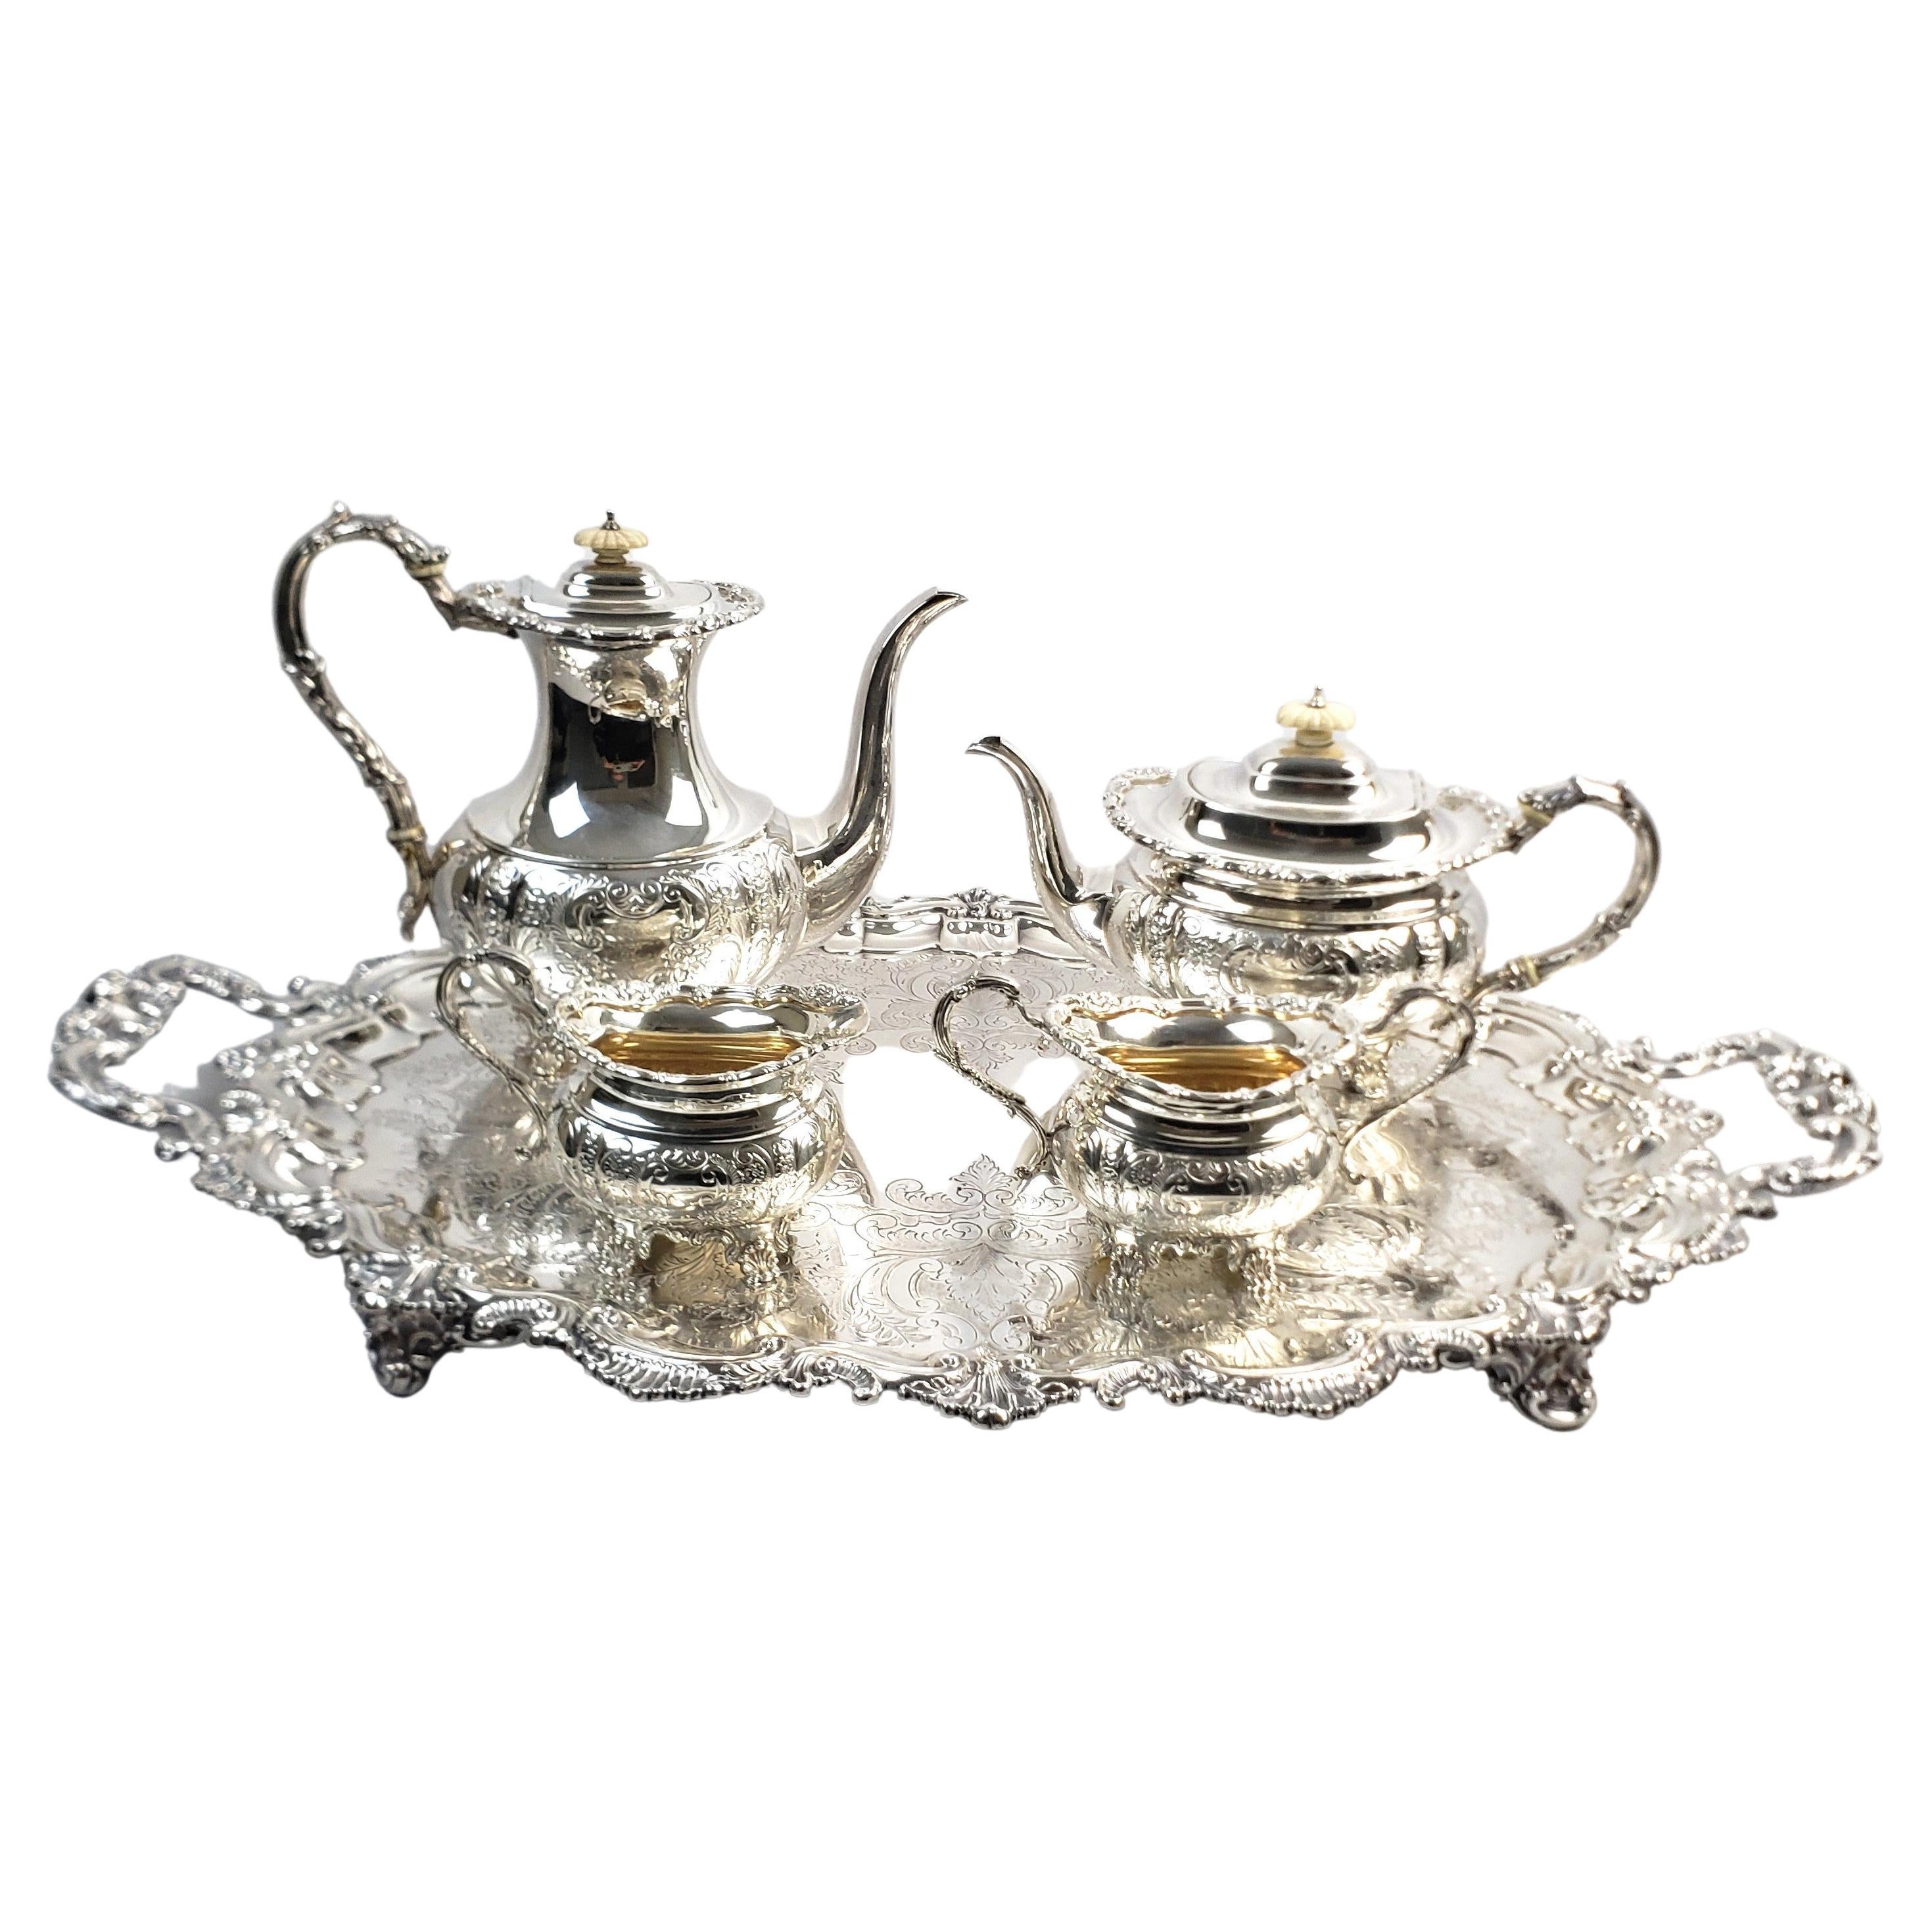 Antique English Sterling Silver Tea Set on Huge Silver Plated Serving Tray For Sale